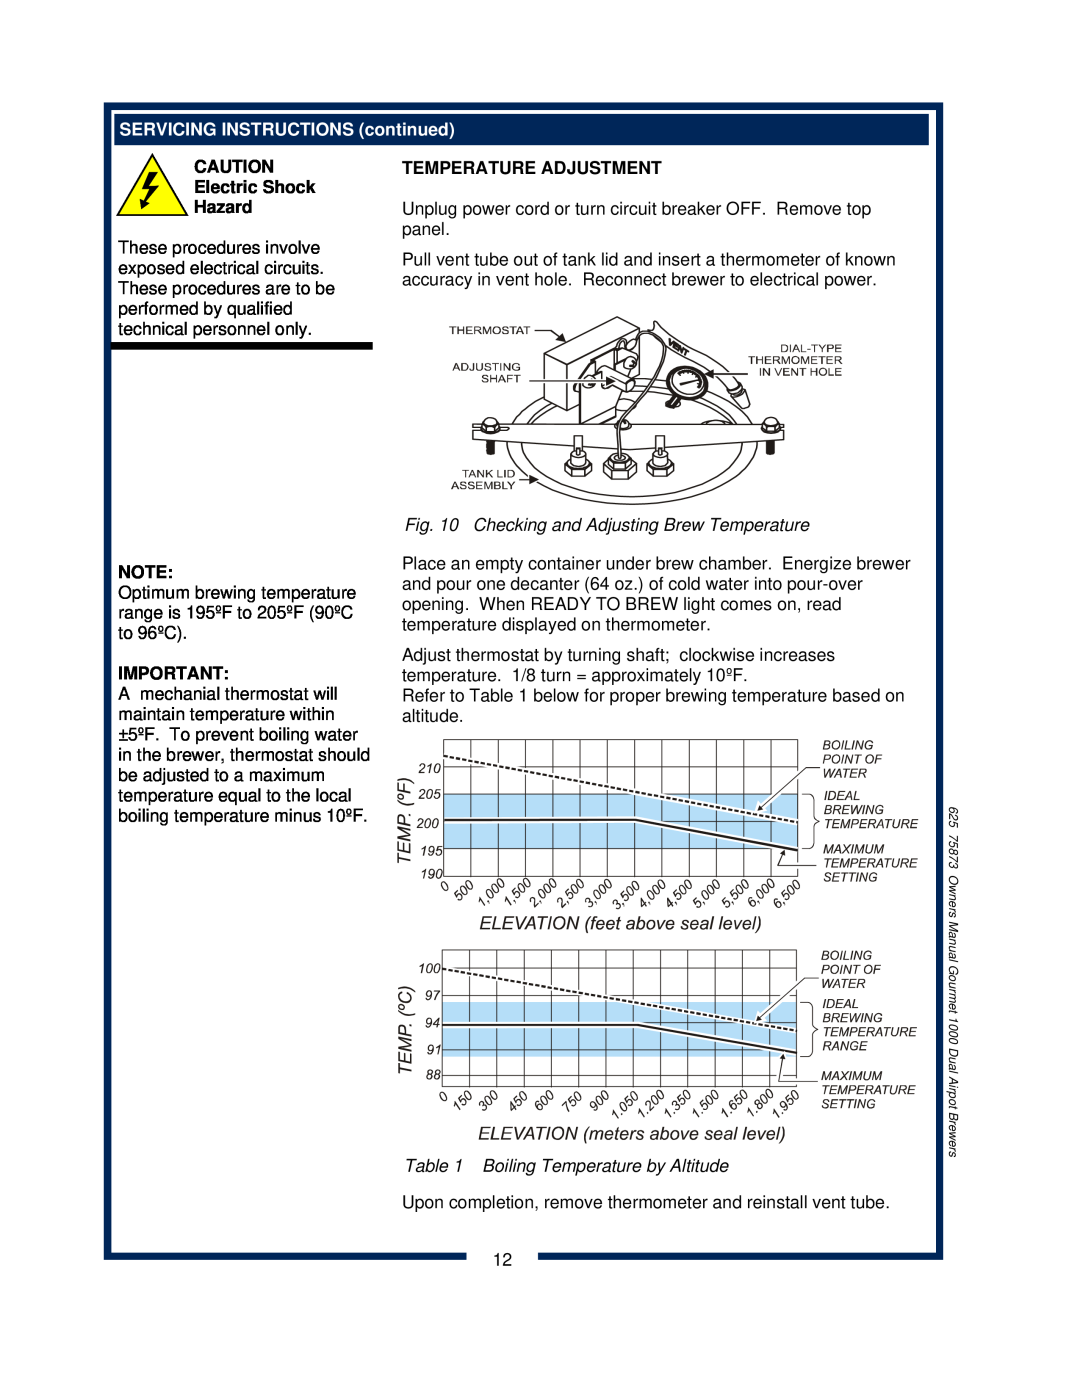 Bloomfield 8792 owner manual SERVICING INSTRUCTIONS continued, Electric Shock Hazard, Temperature Adjustment 